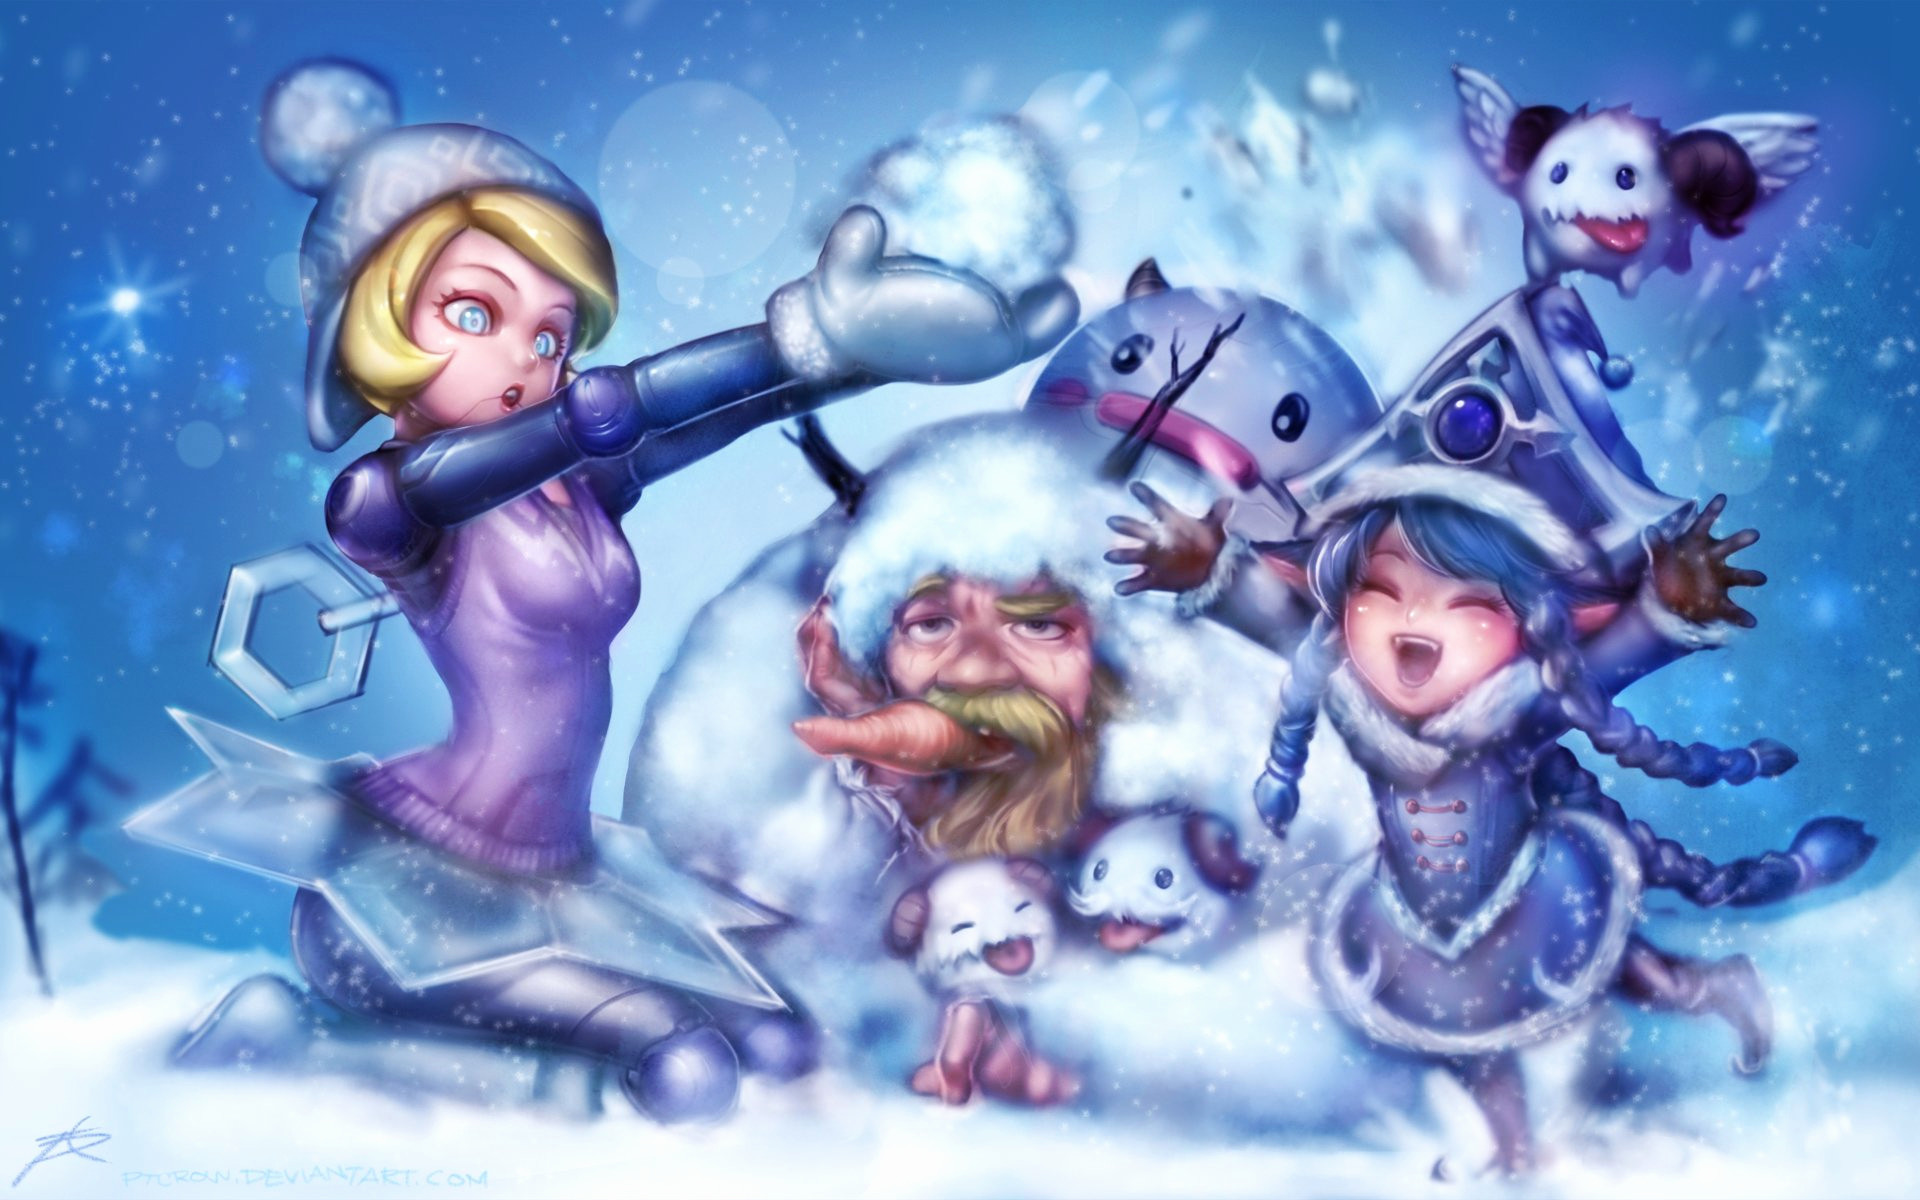 1920x1200 2560x1440 Download Olaf Frozen Wallpapers Pictures.